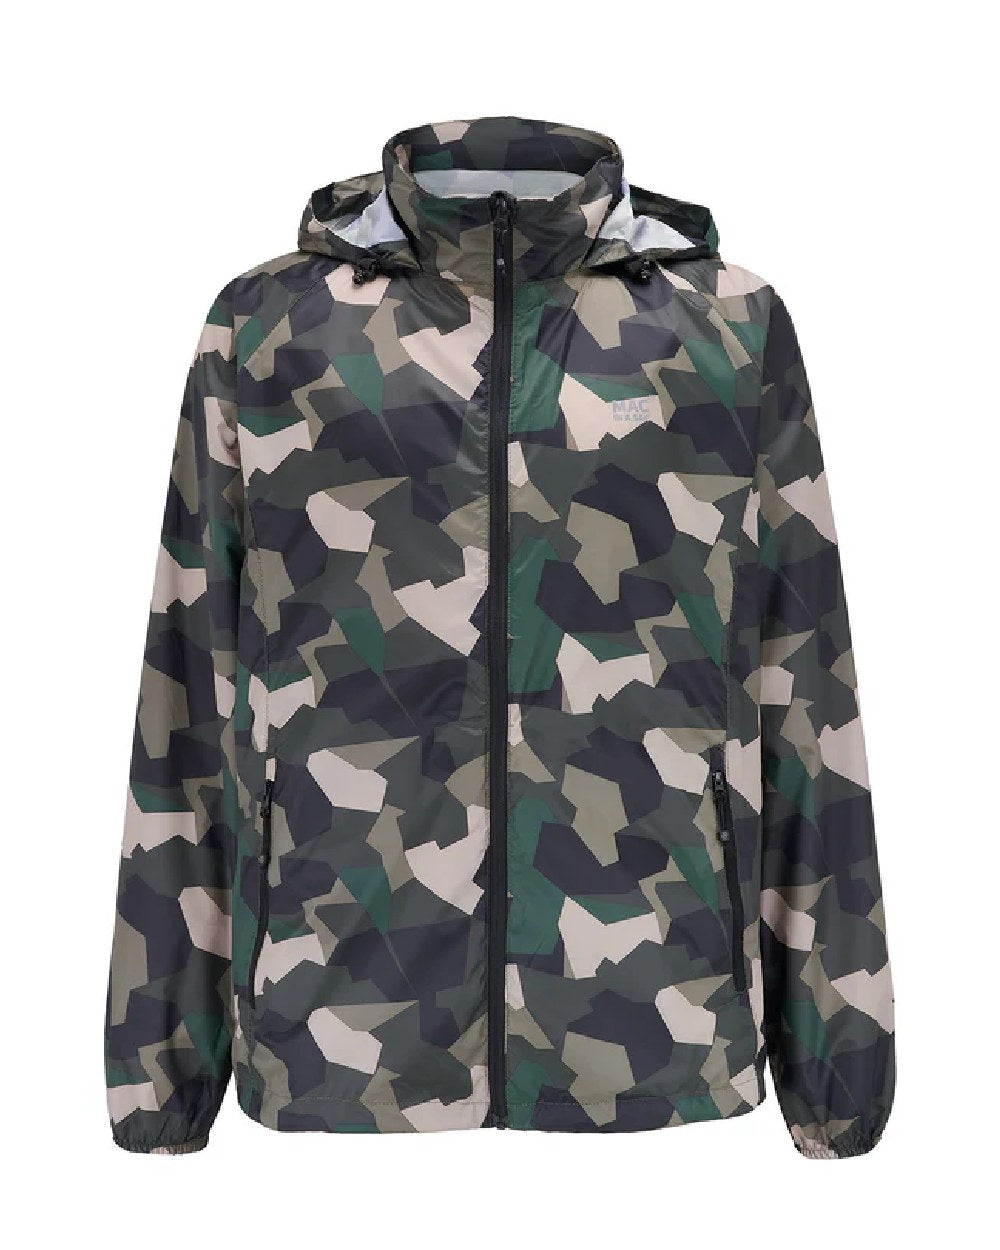 Green Camo coloured Mac In A Sac Packable Origin Camo Waterproof Jacket on white background 